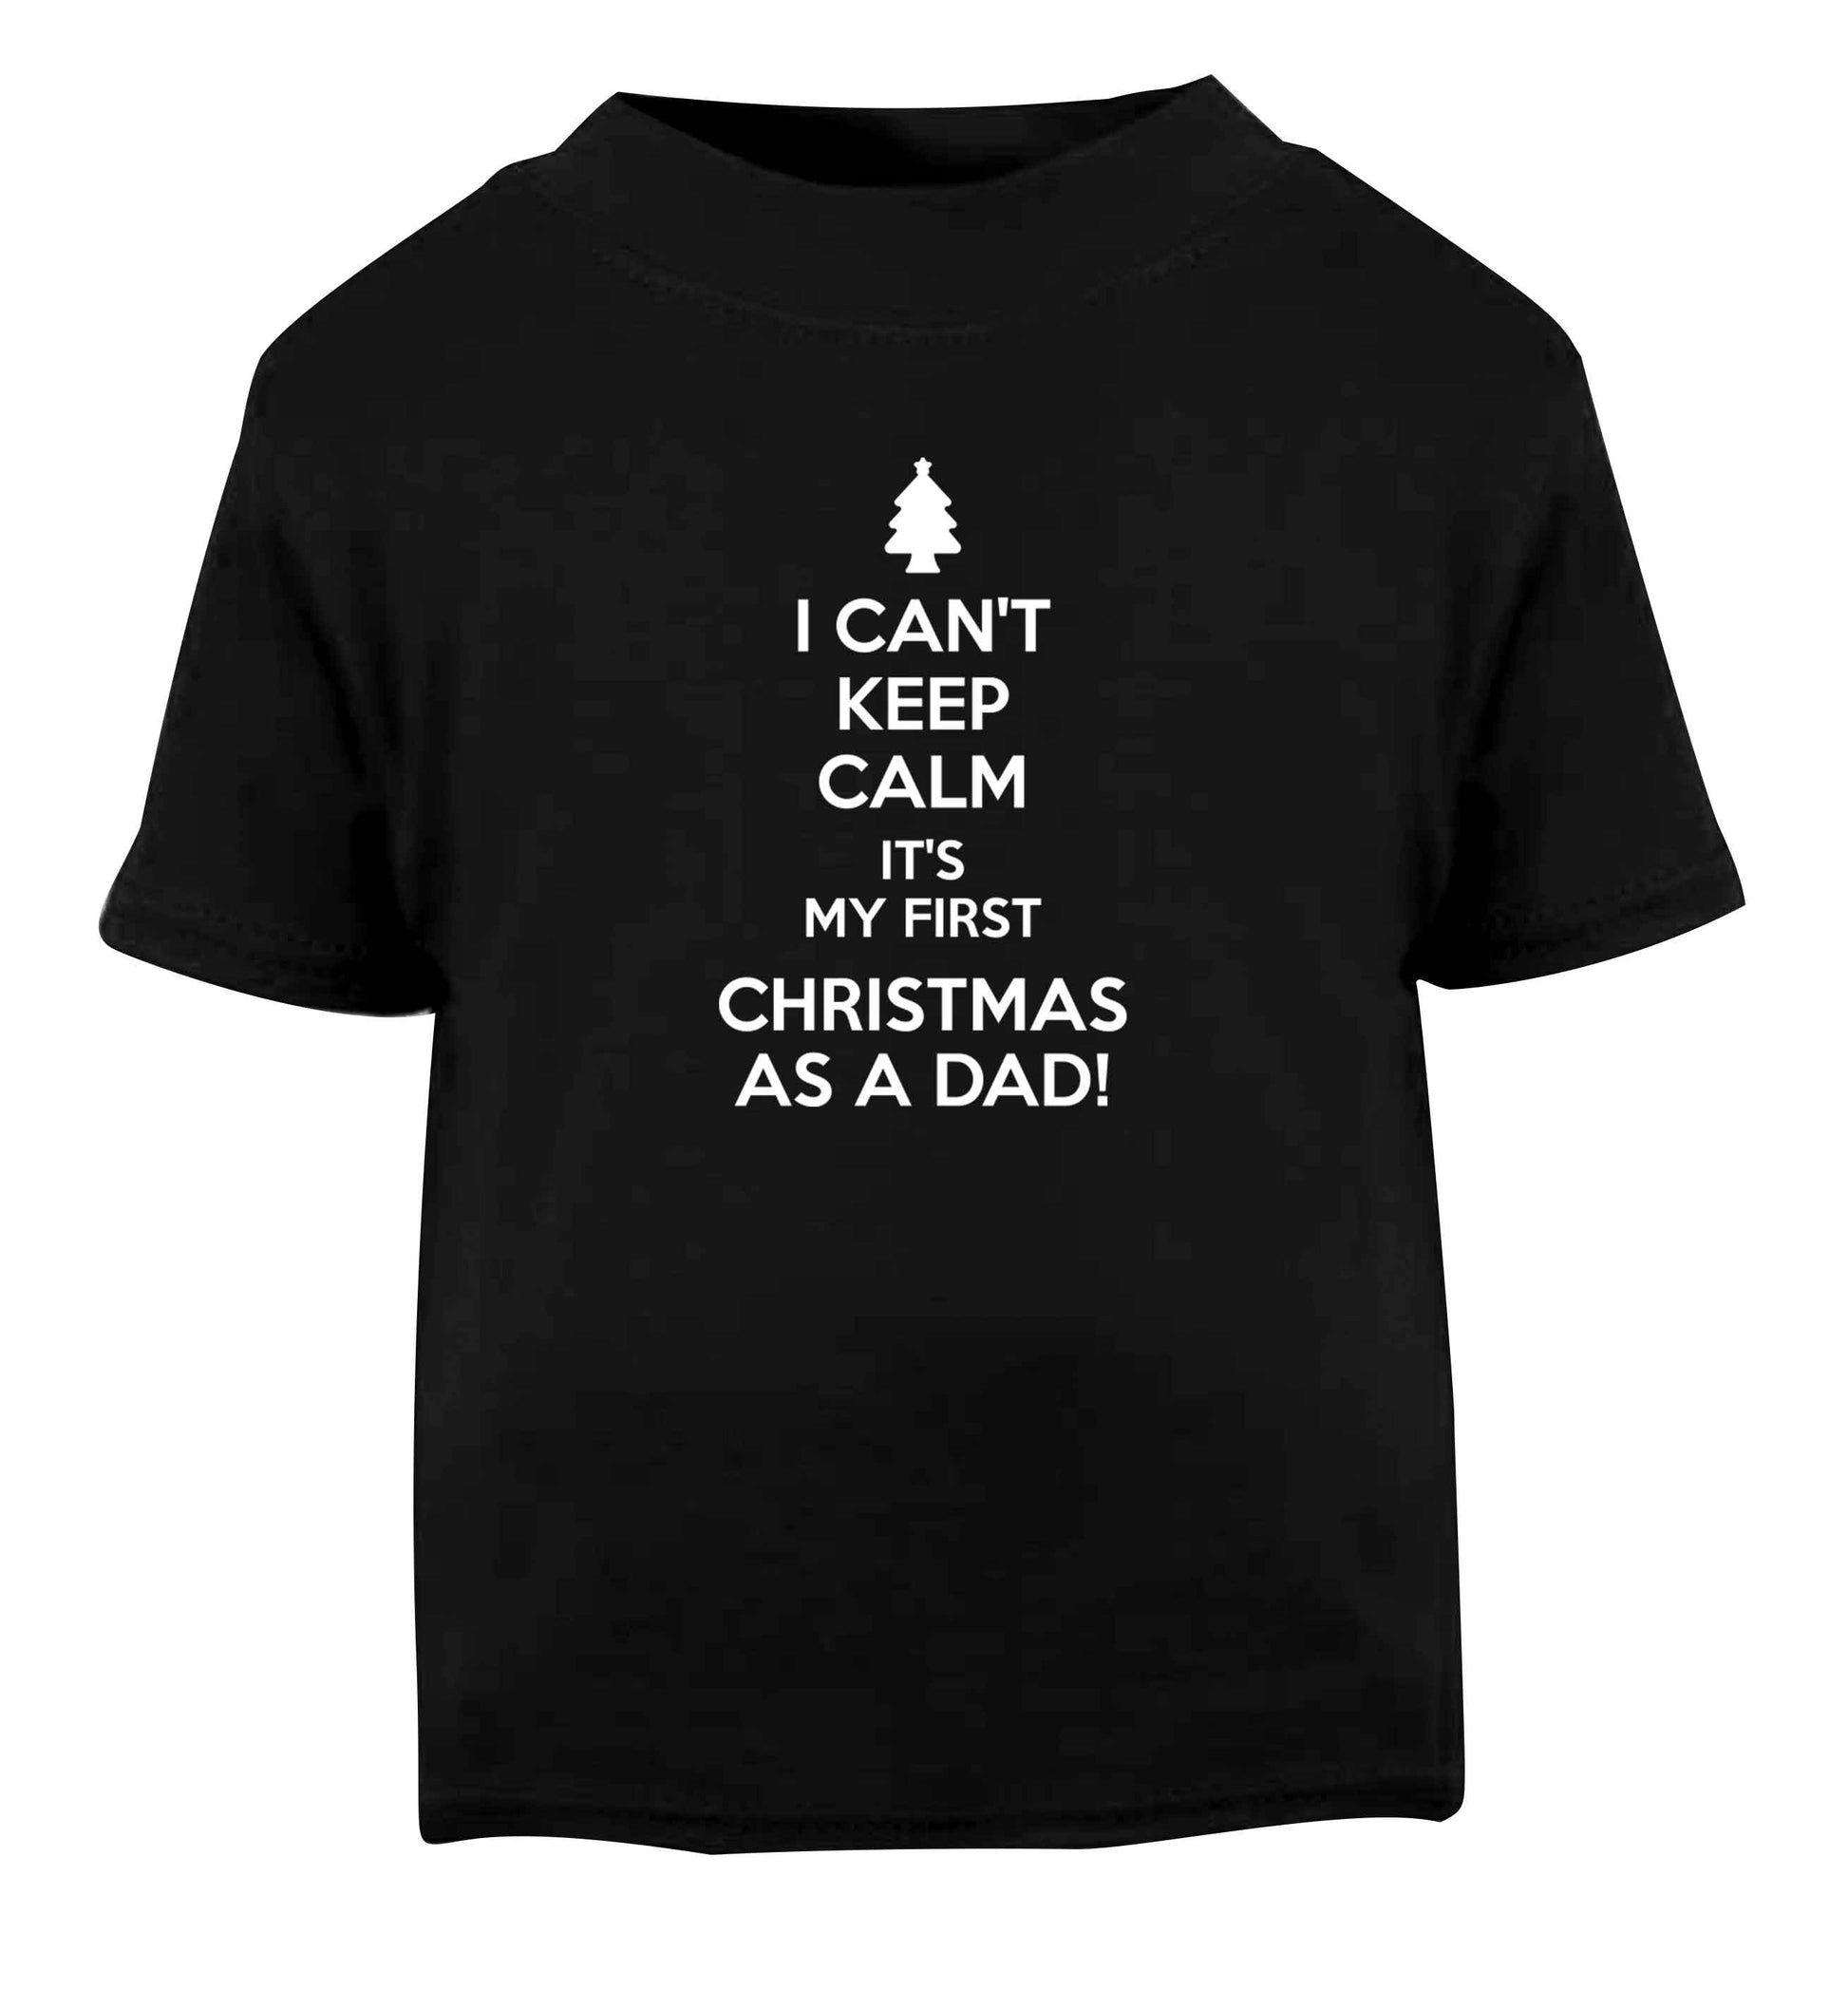 I can't keep calm it's my first Christmas as a dad Black Baby Toddler Tshirt 2 years